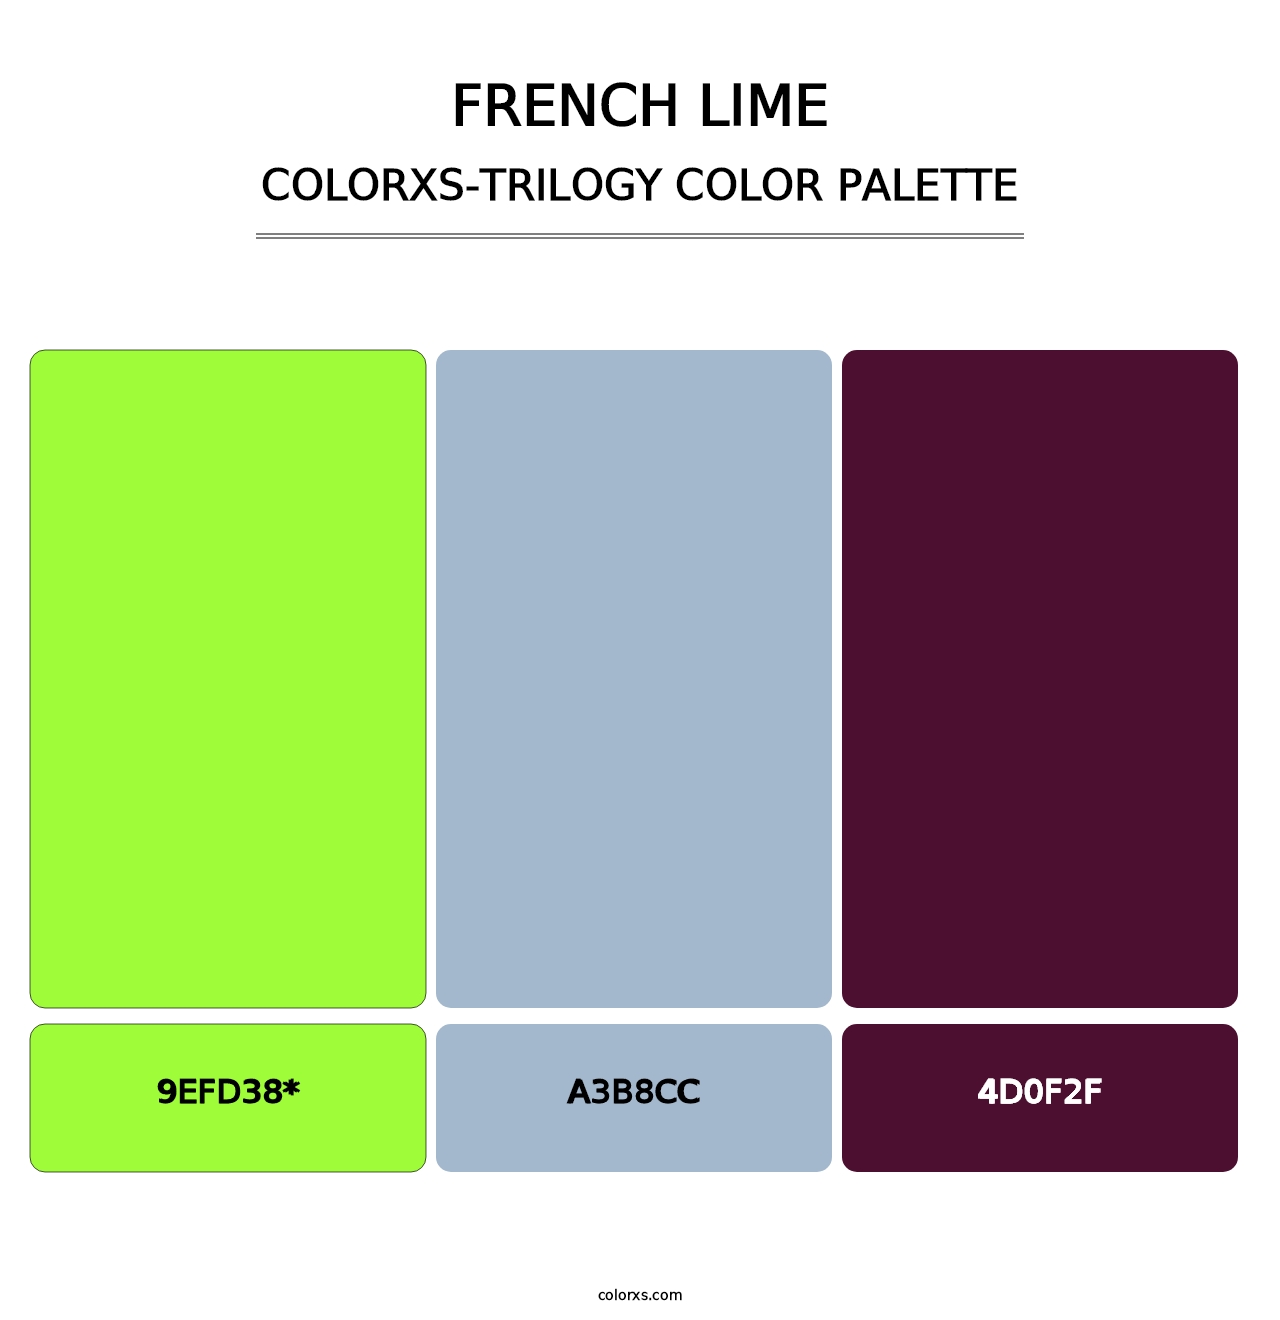 French Lime - Colorxs Trilogy Palette